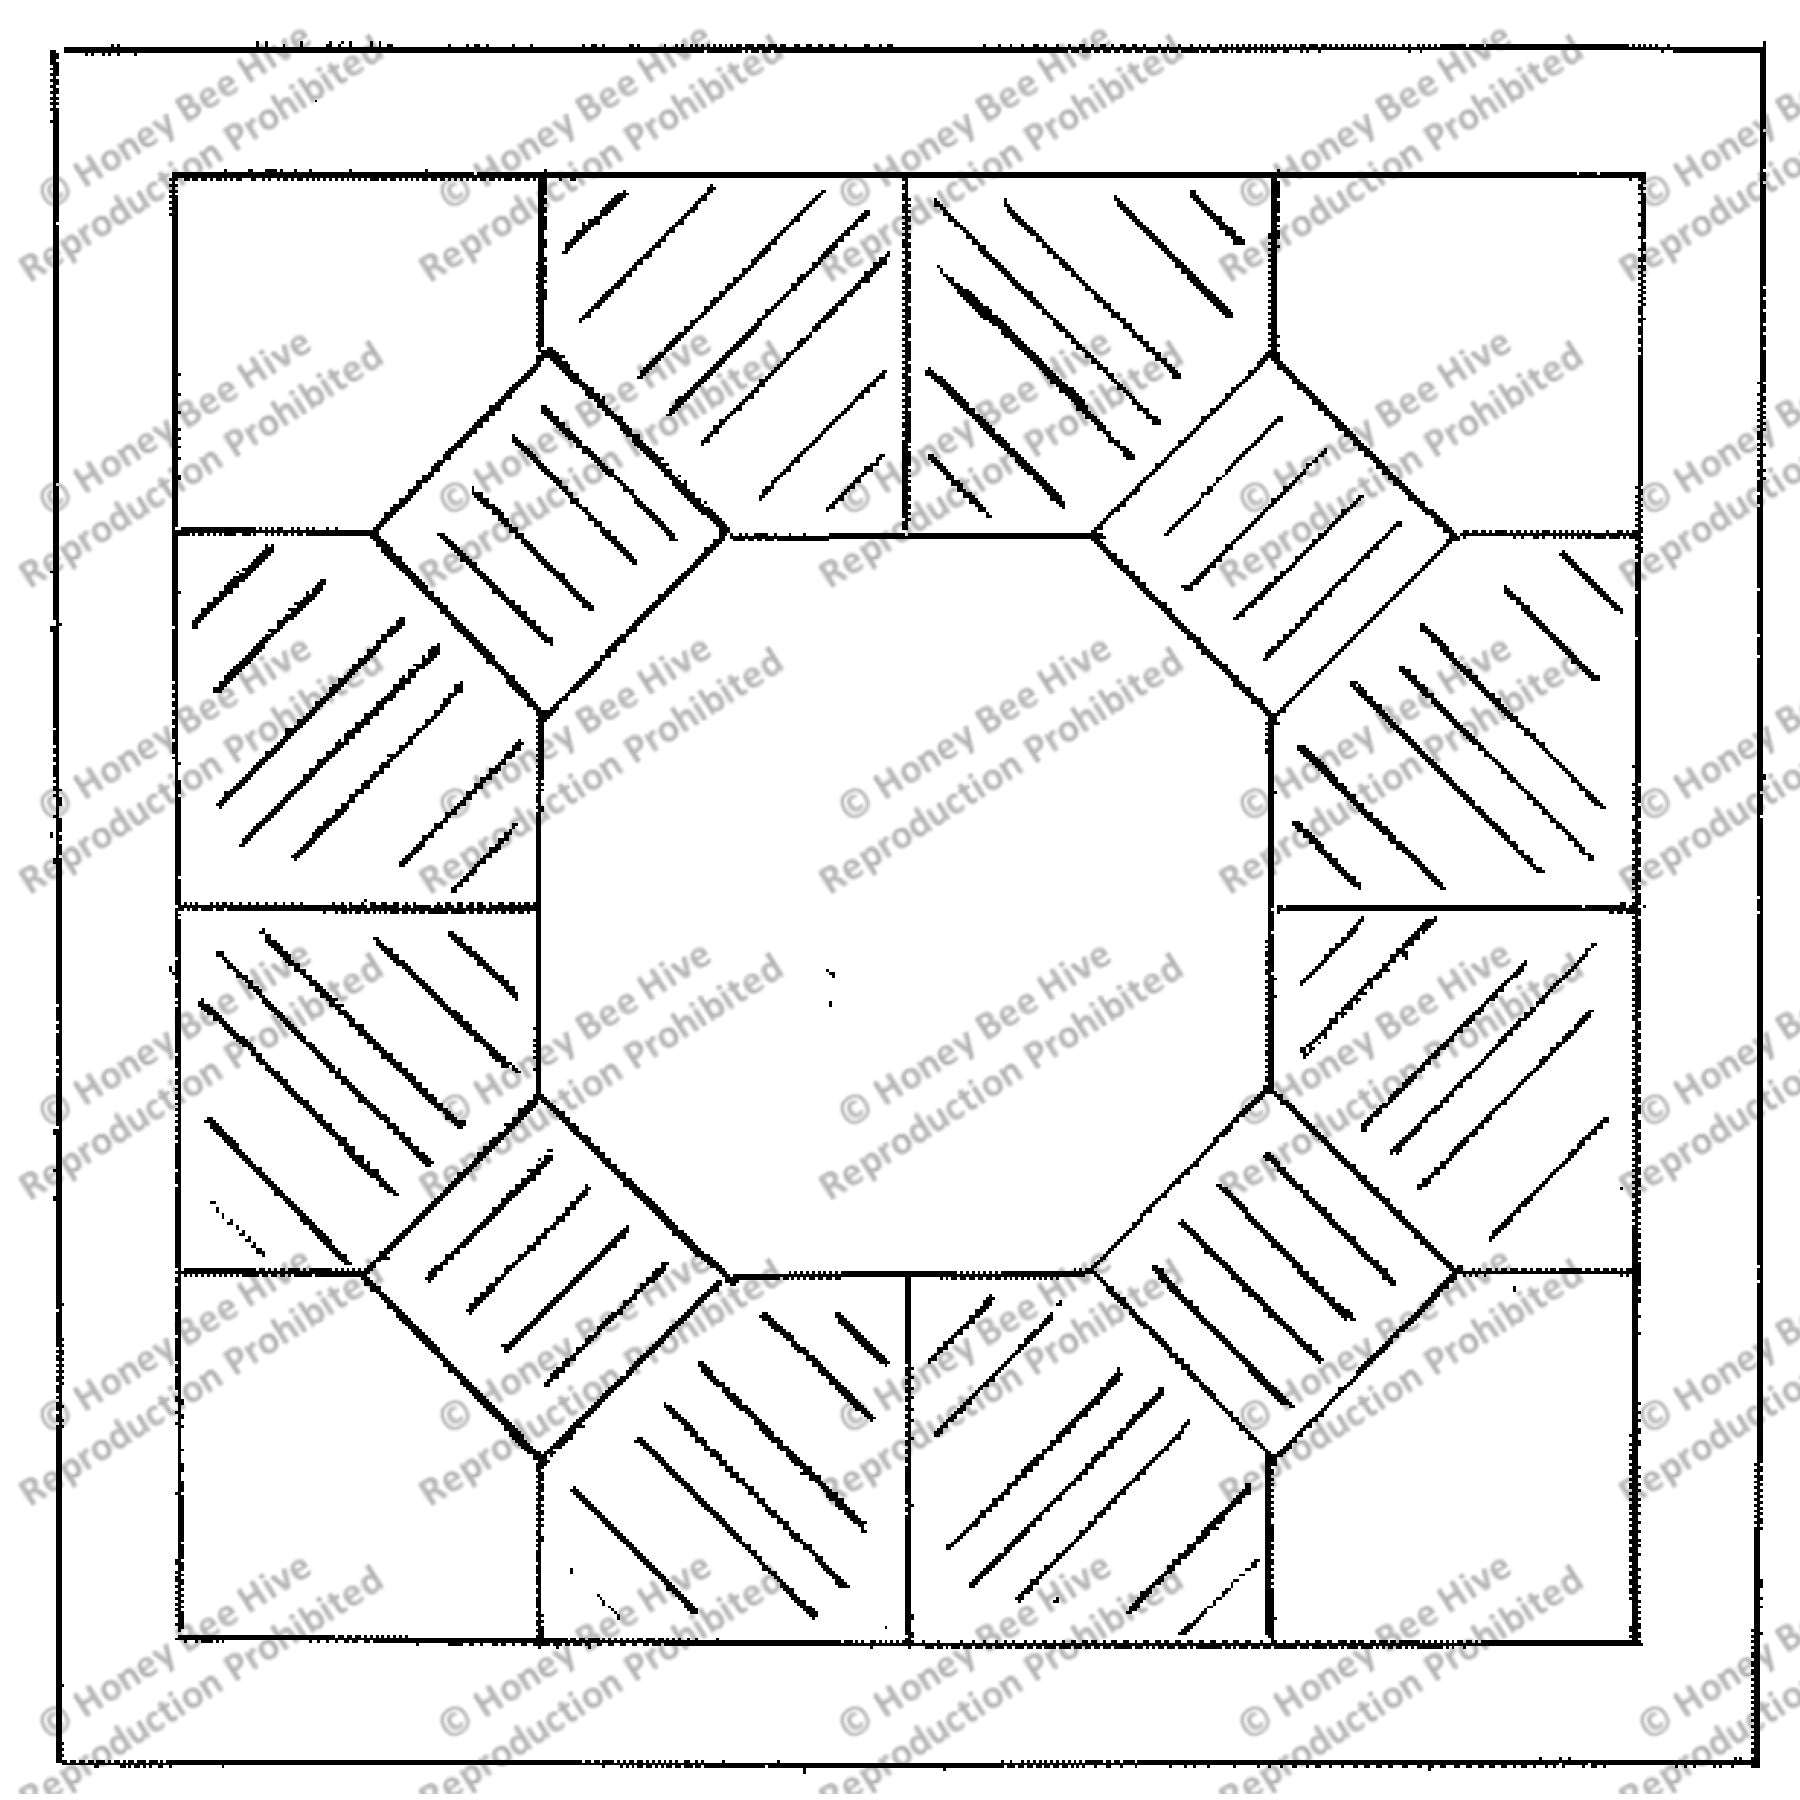 Bow Tie Quilt, rug hooking pattern